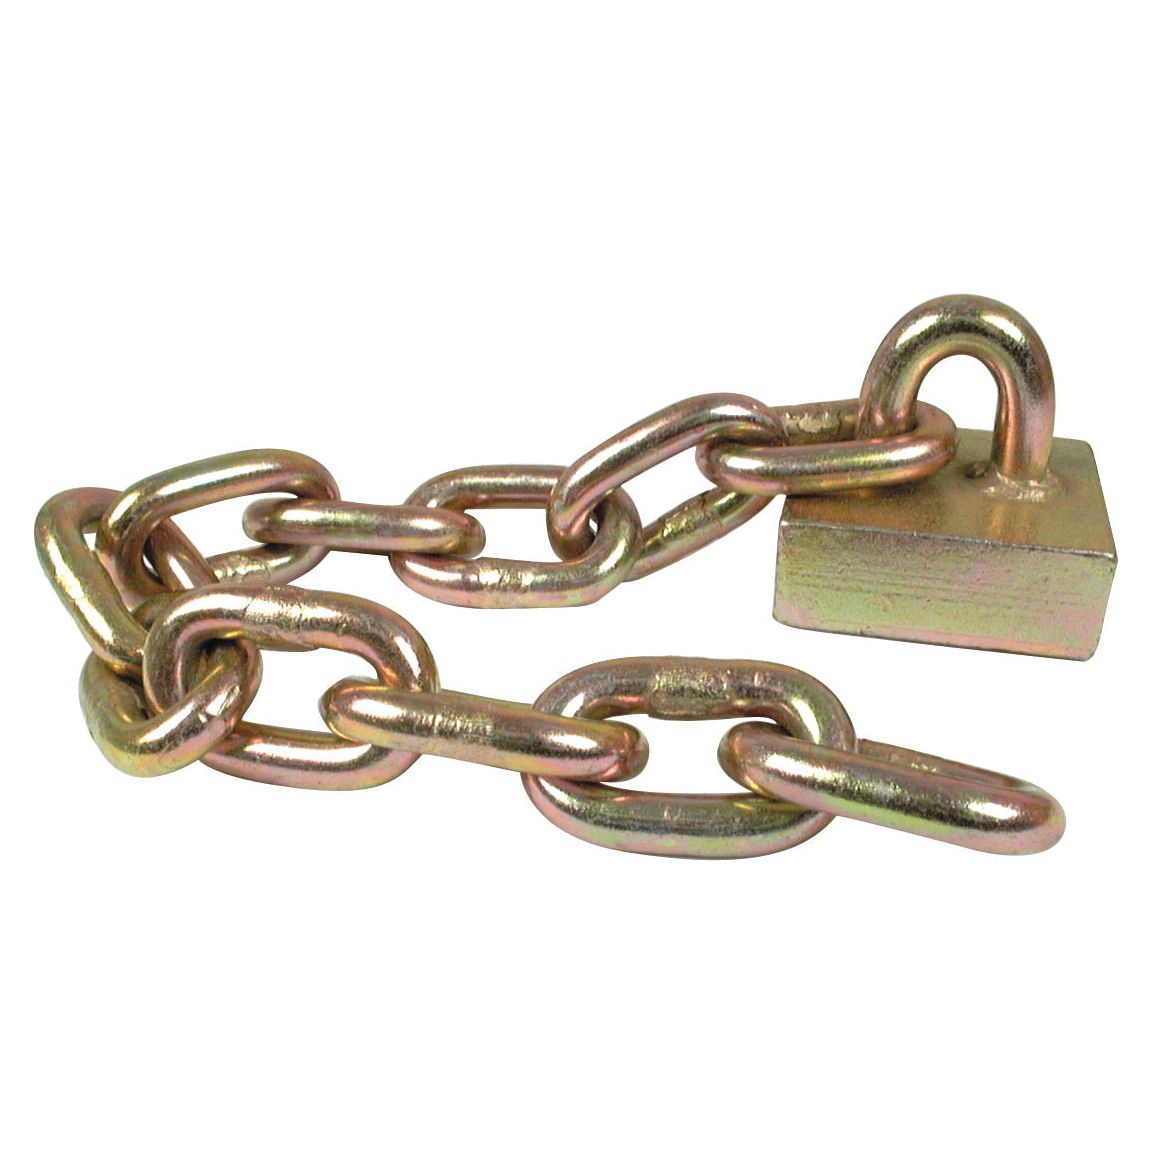 Flail Chain Assembly 1/2" x 11 Link Replacement for Marshall - S.78869 - Farming Parts